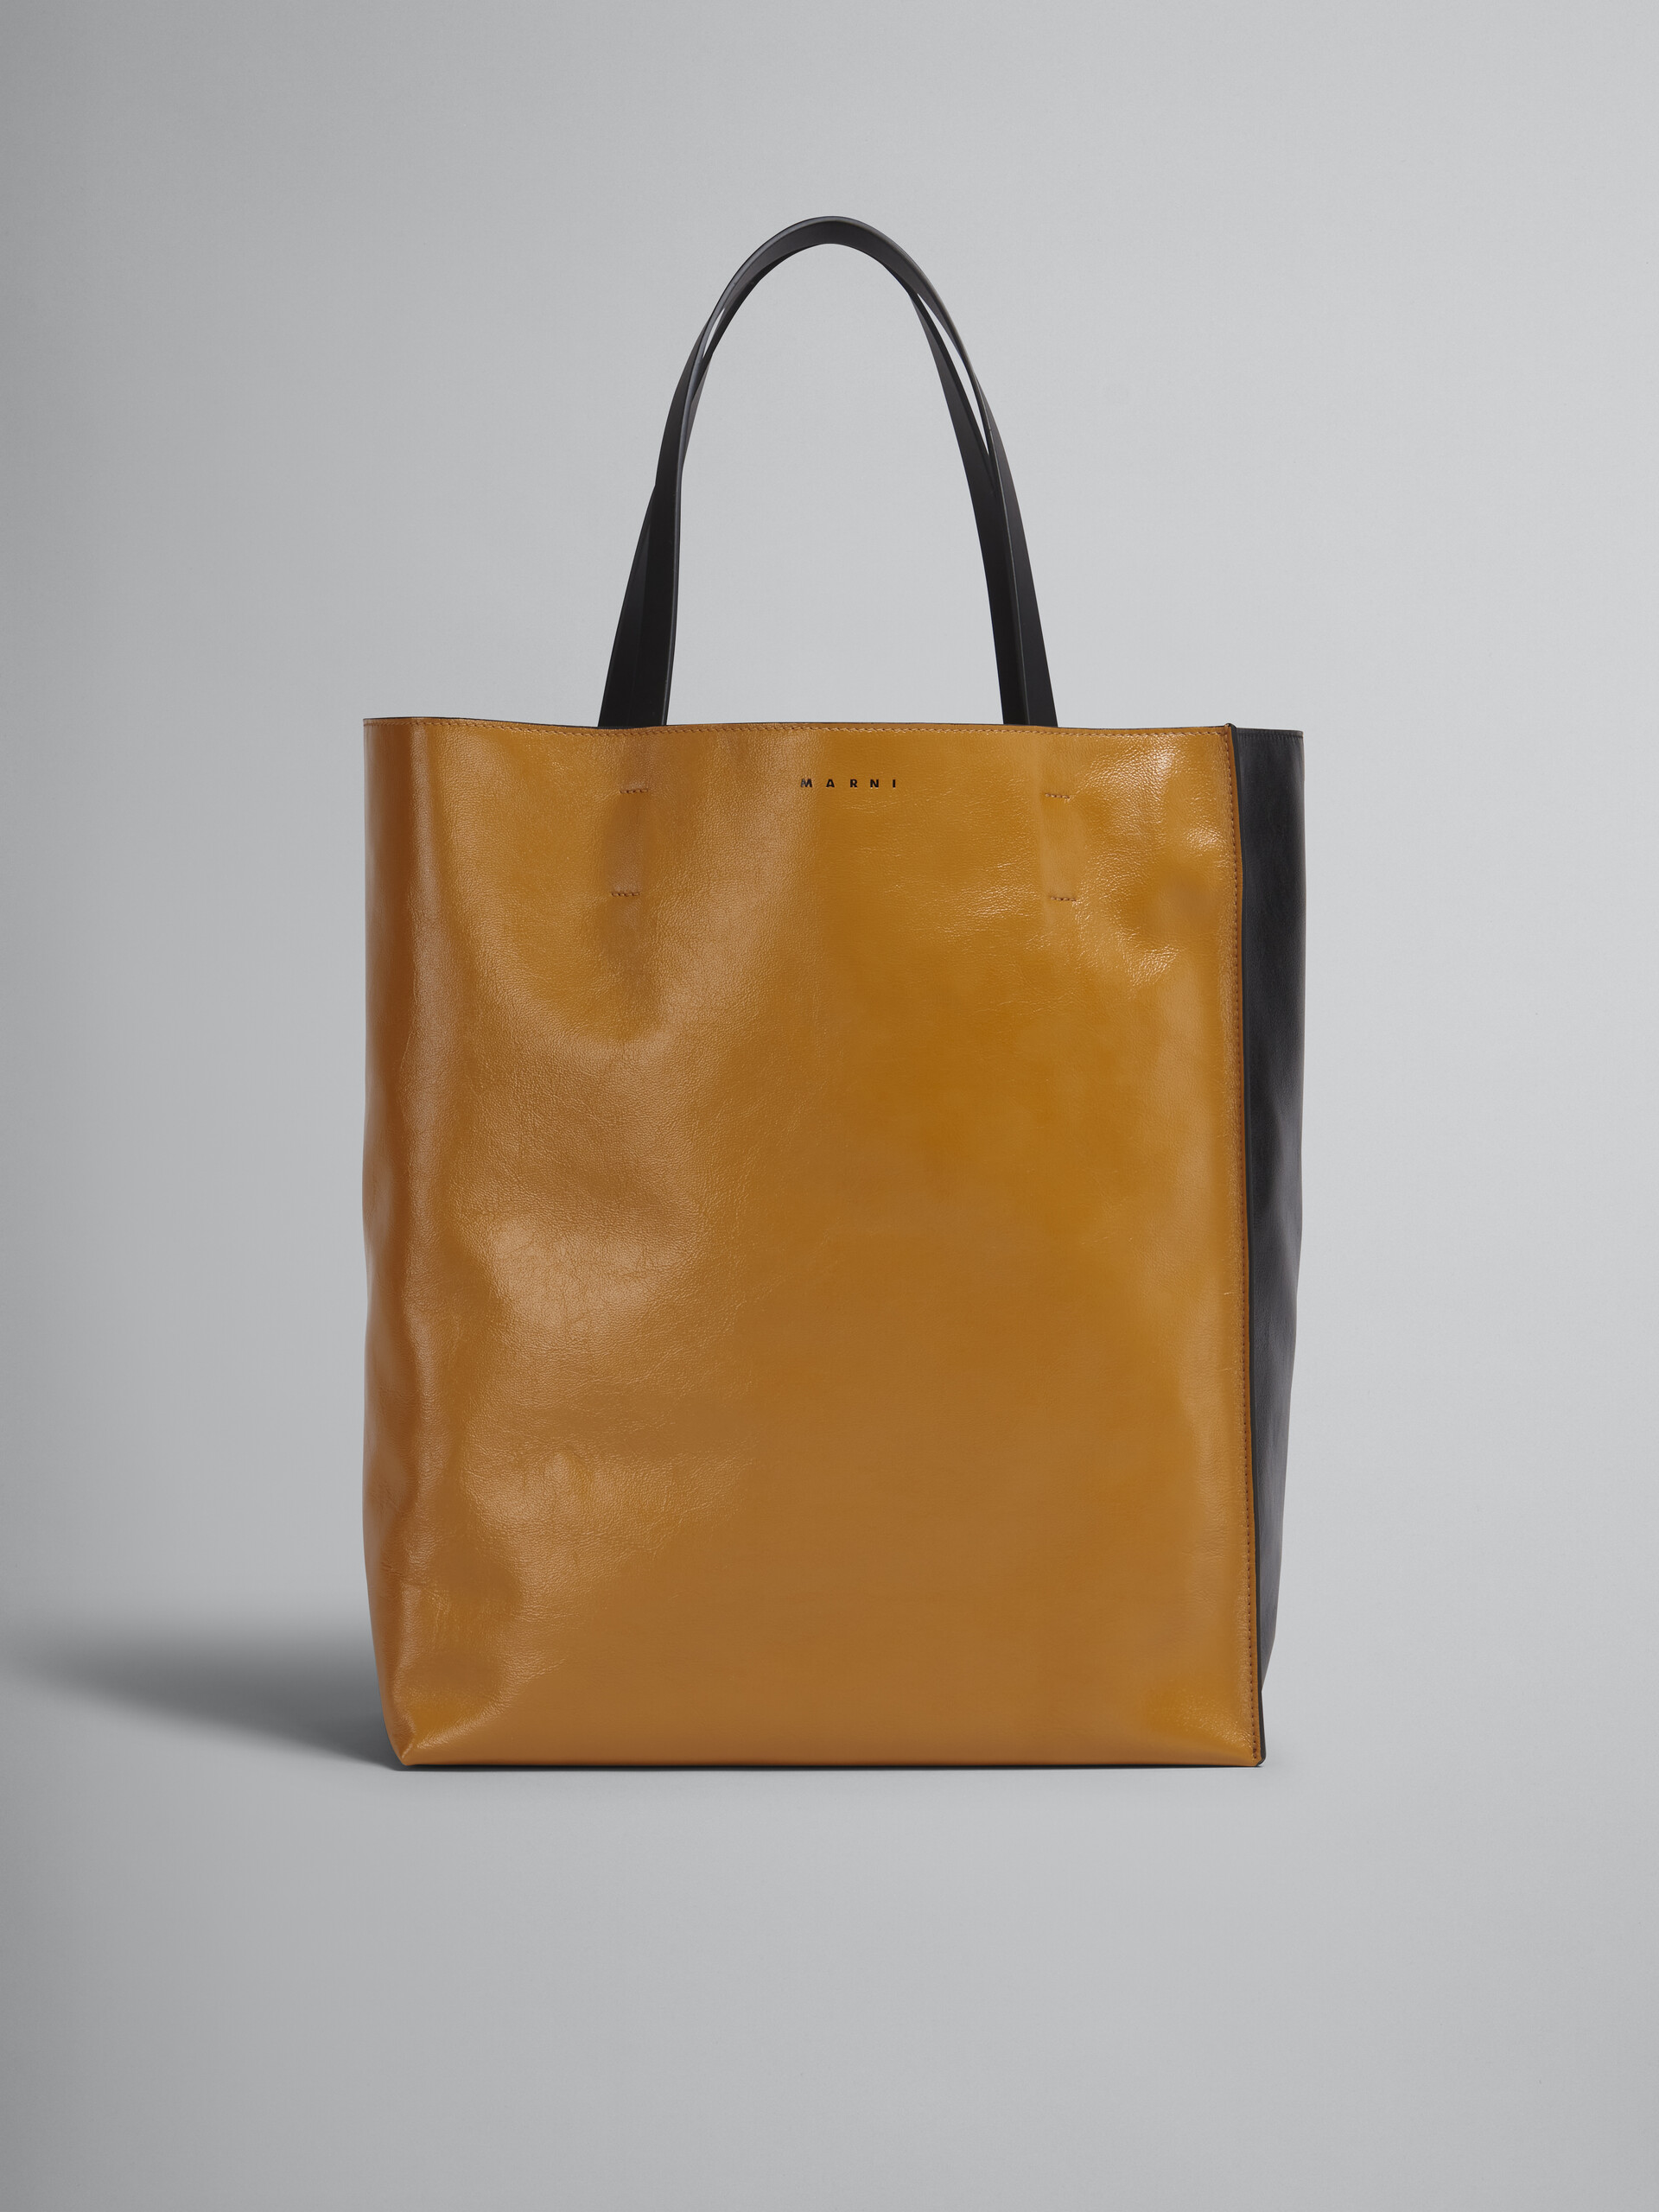 MUSEO SOFT bag in shiny brown and black leather - Shopping Bags - Image 1